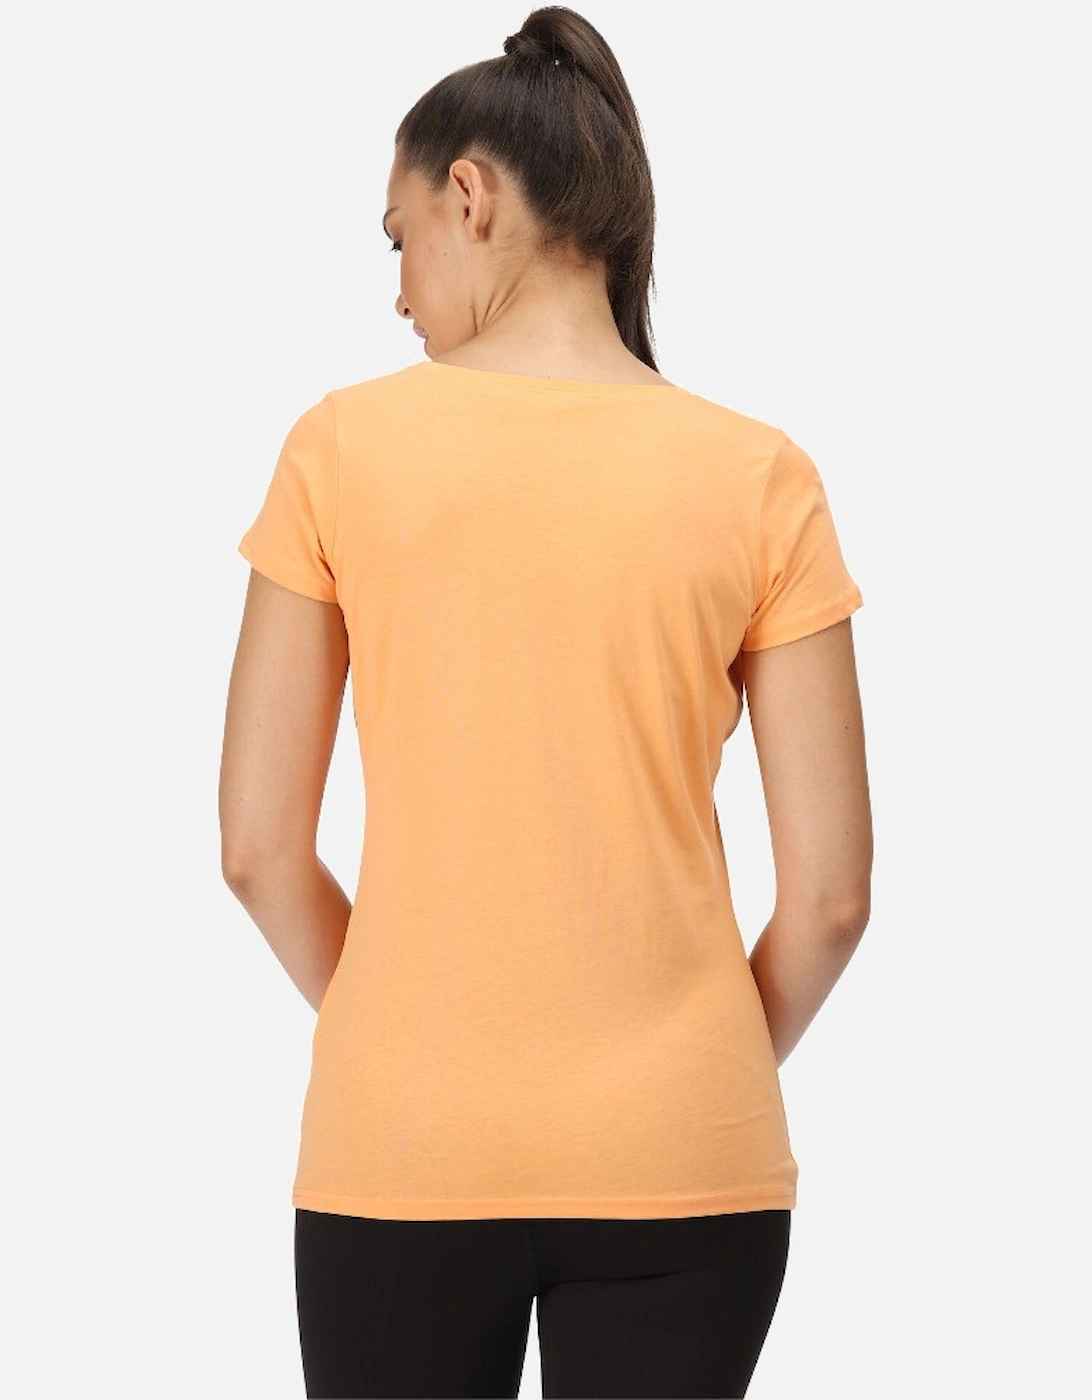 Womens Breezed II Coolweave Cotton Jersey T Shirt